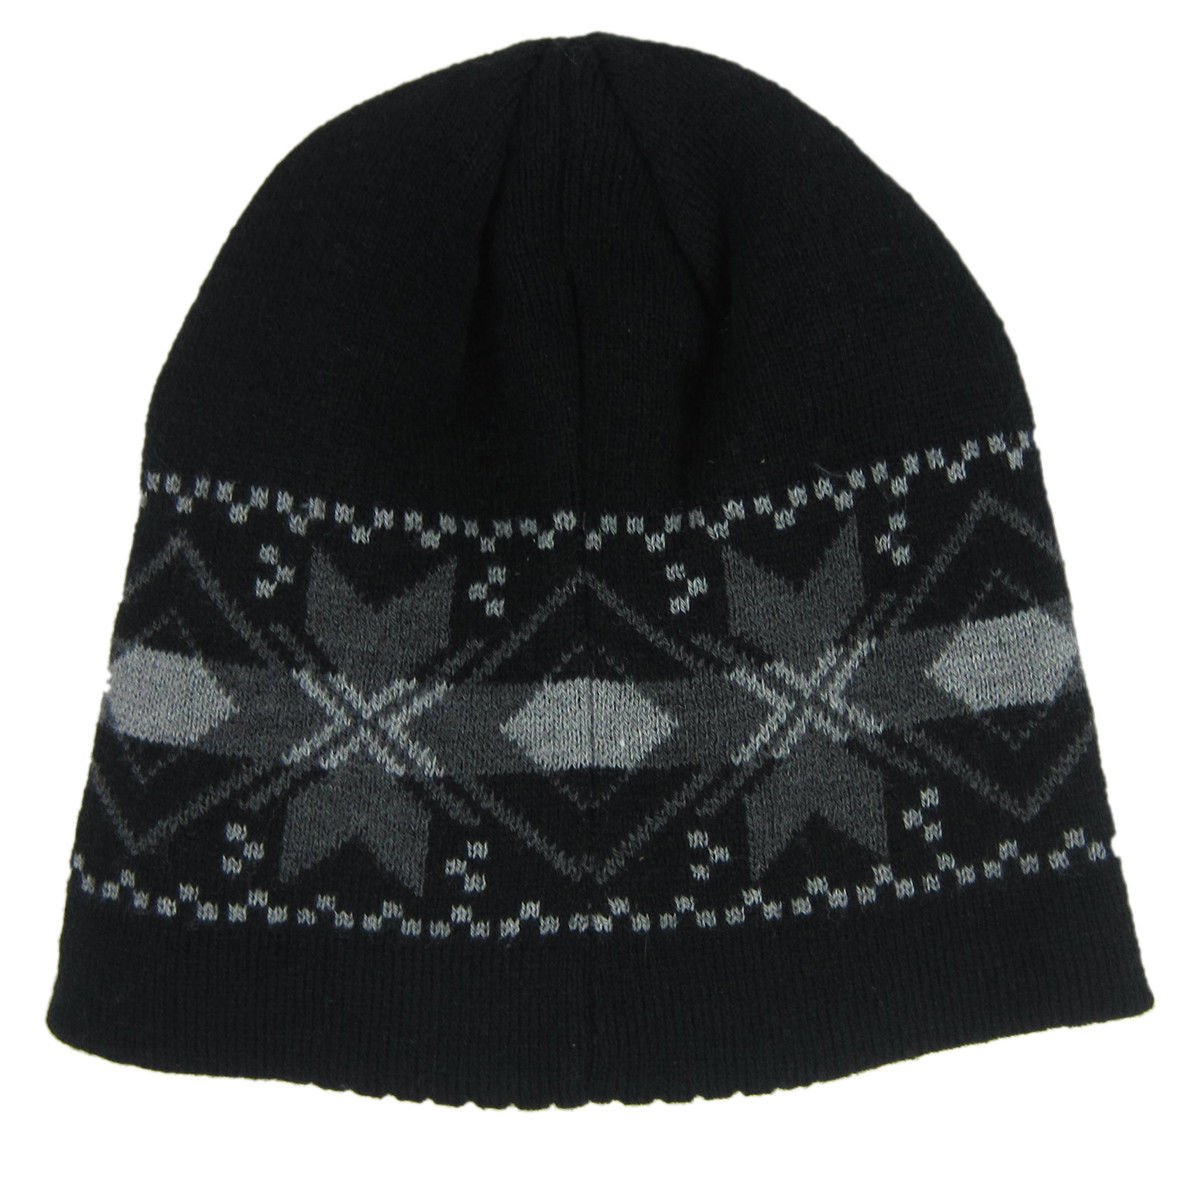 NEW without Tags IGLOOS Men's Black Gray Beanie Hat One Size Fits Most ...